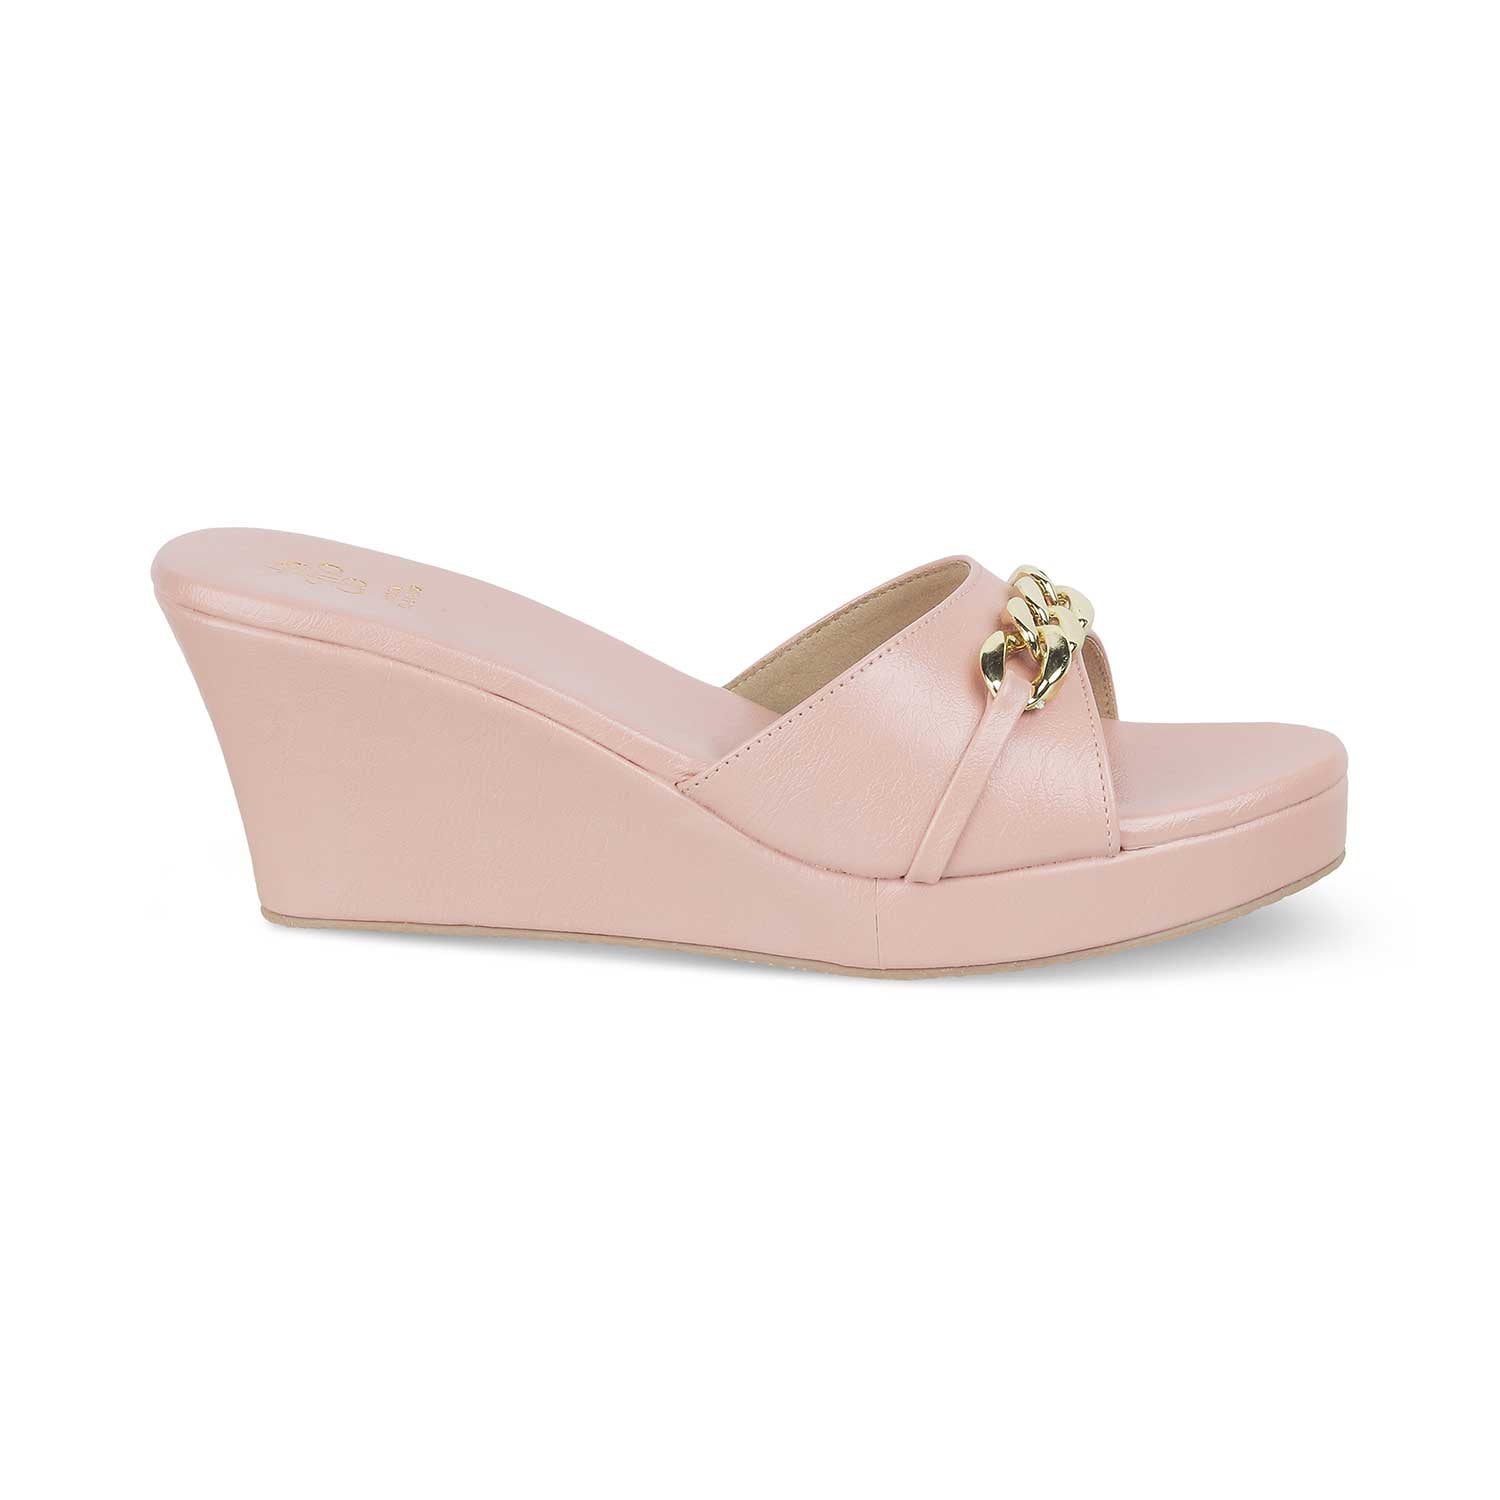 Tresmode-The Chain Pink Women's Dress Wedge Sandals Tresmode-Tresmode